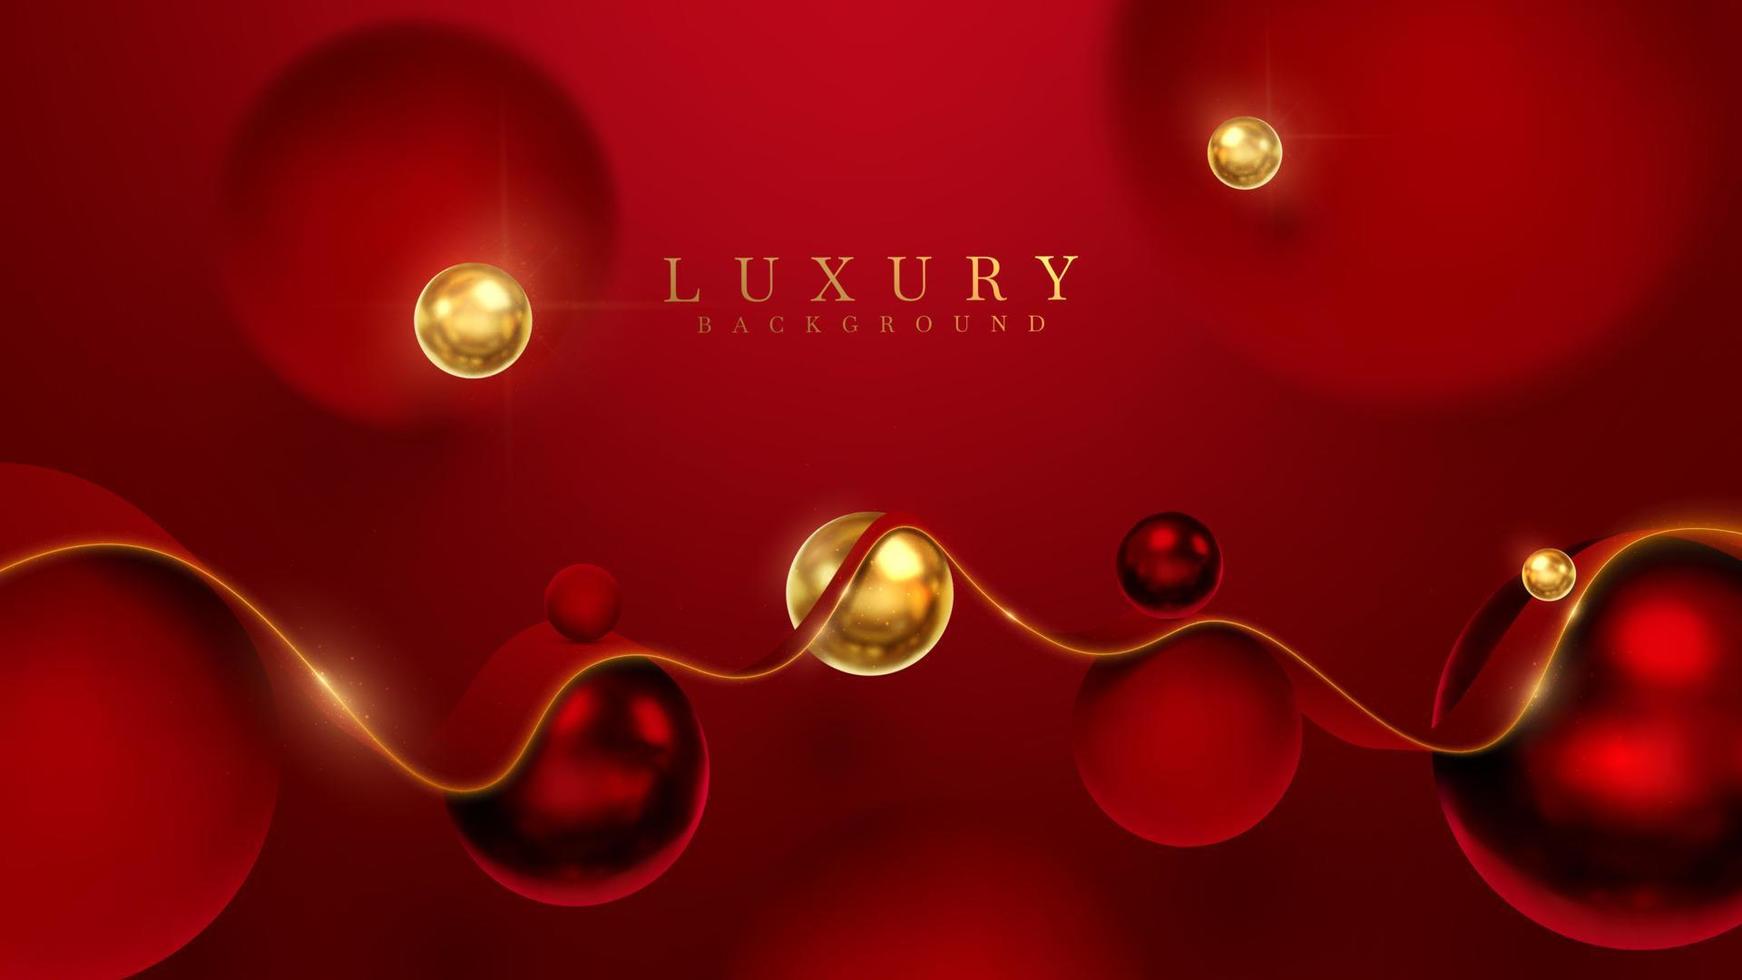 Luxury background with red ribbon element and golden ball with blur effect decoration and glitter light. vector